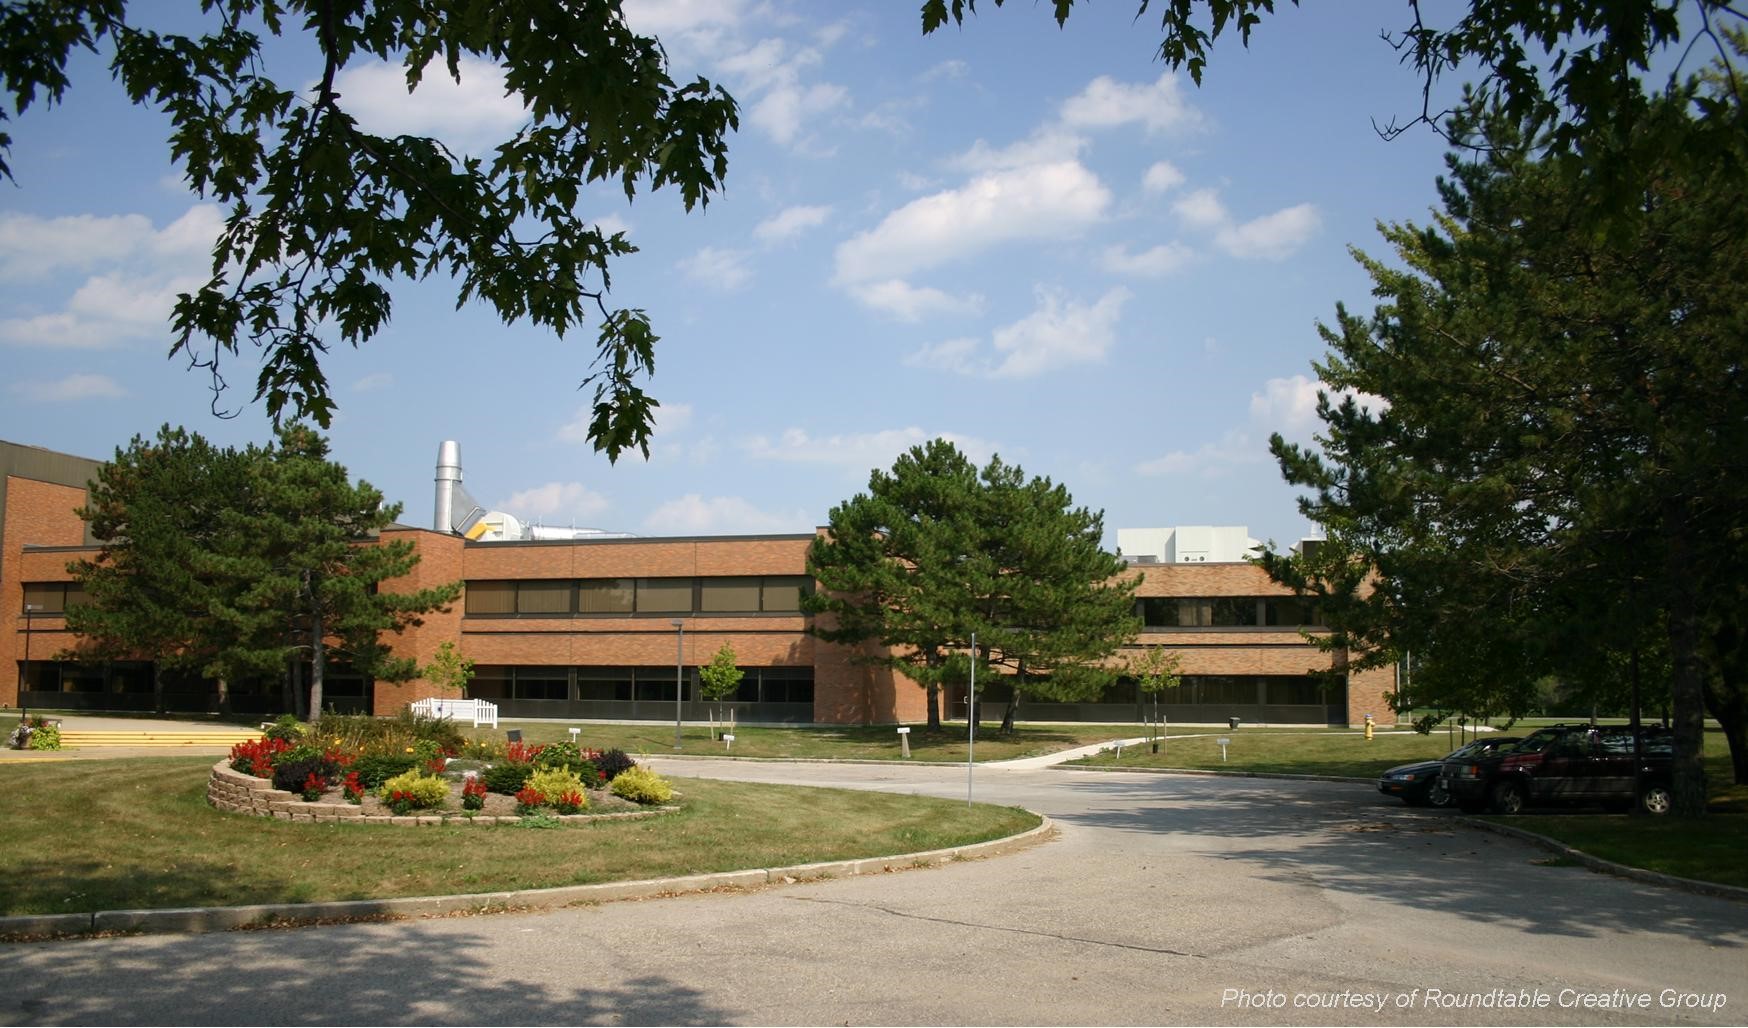 The Bowman Centre for Commercialization, Western Sarnia-Lambton Research Park